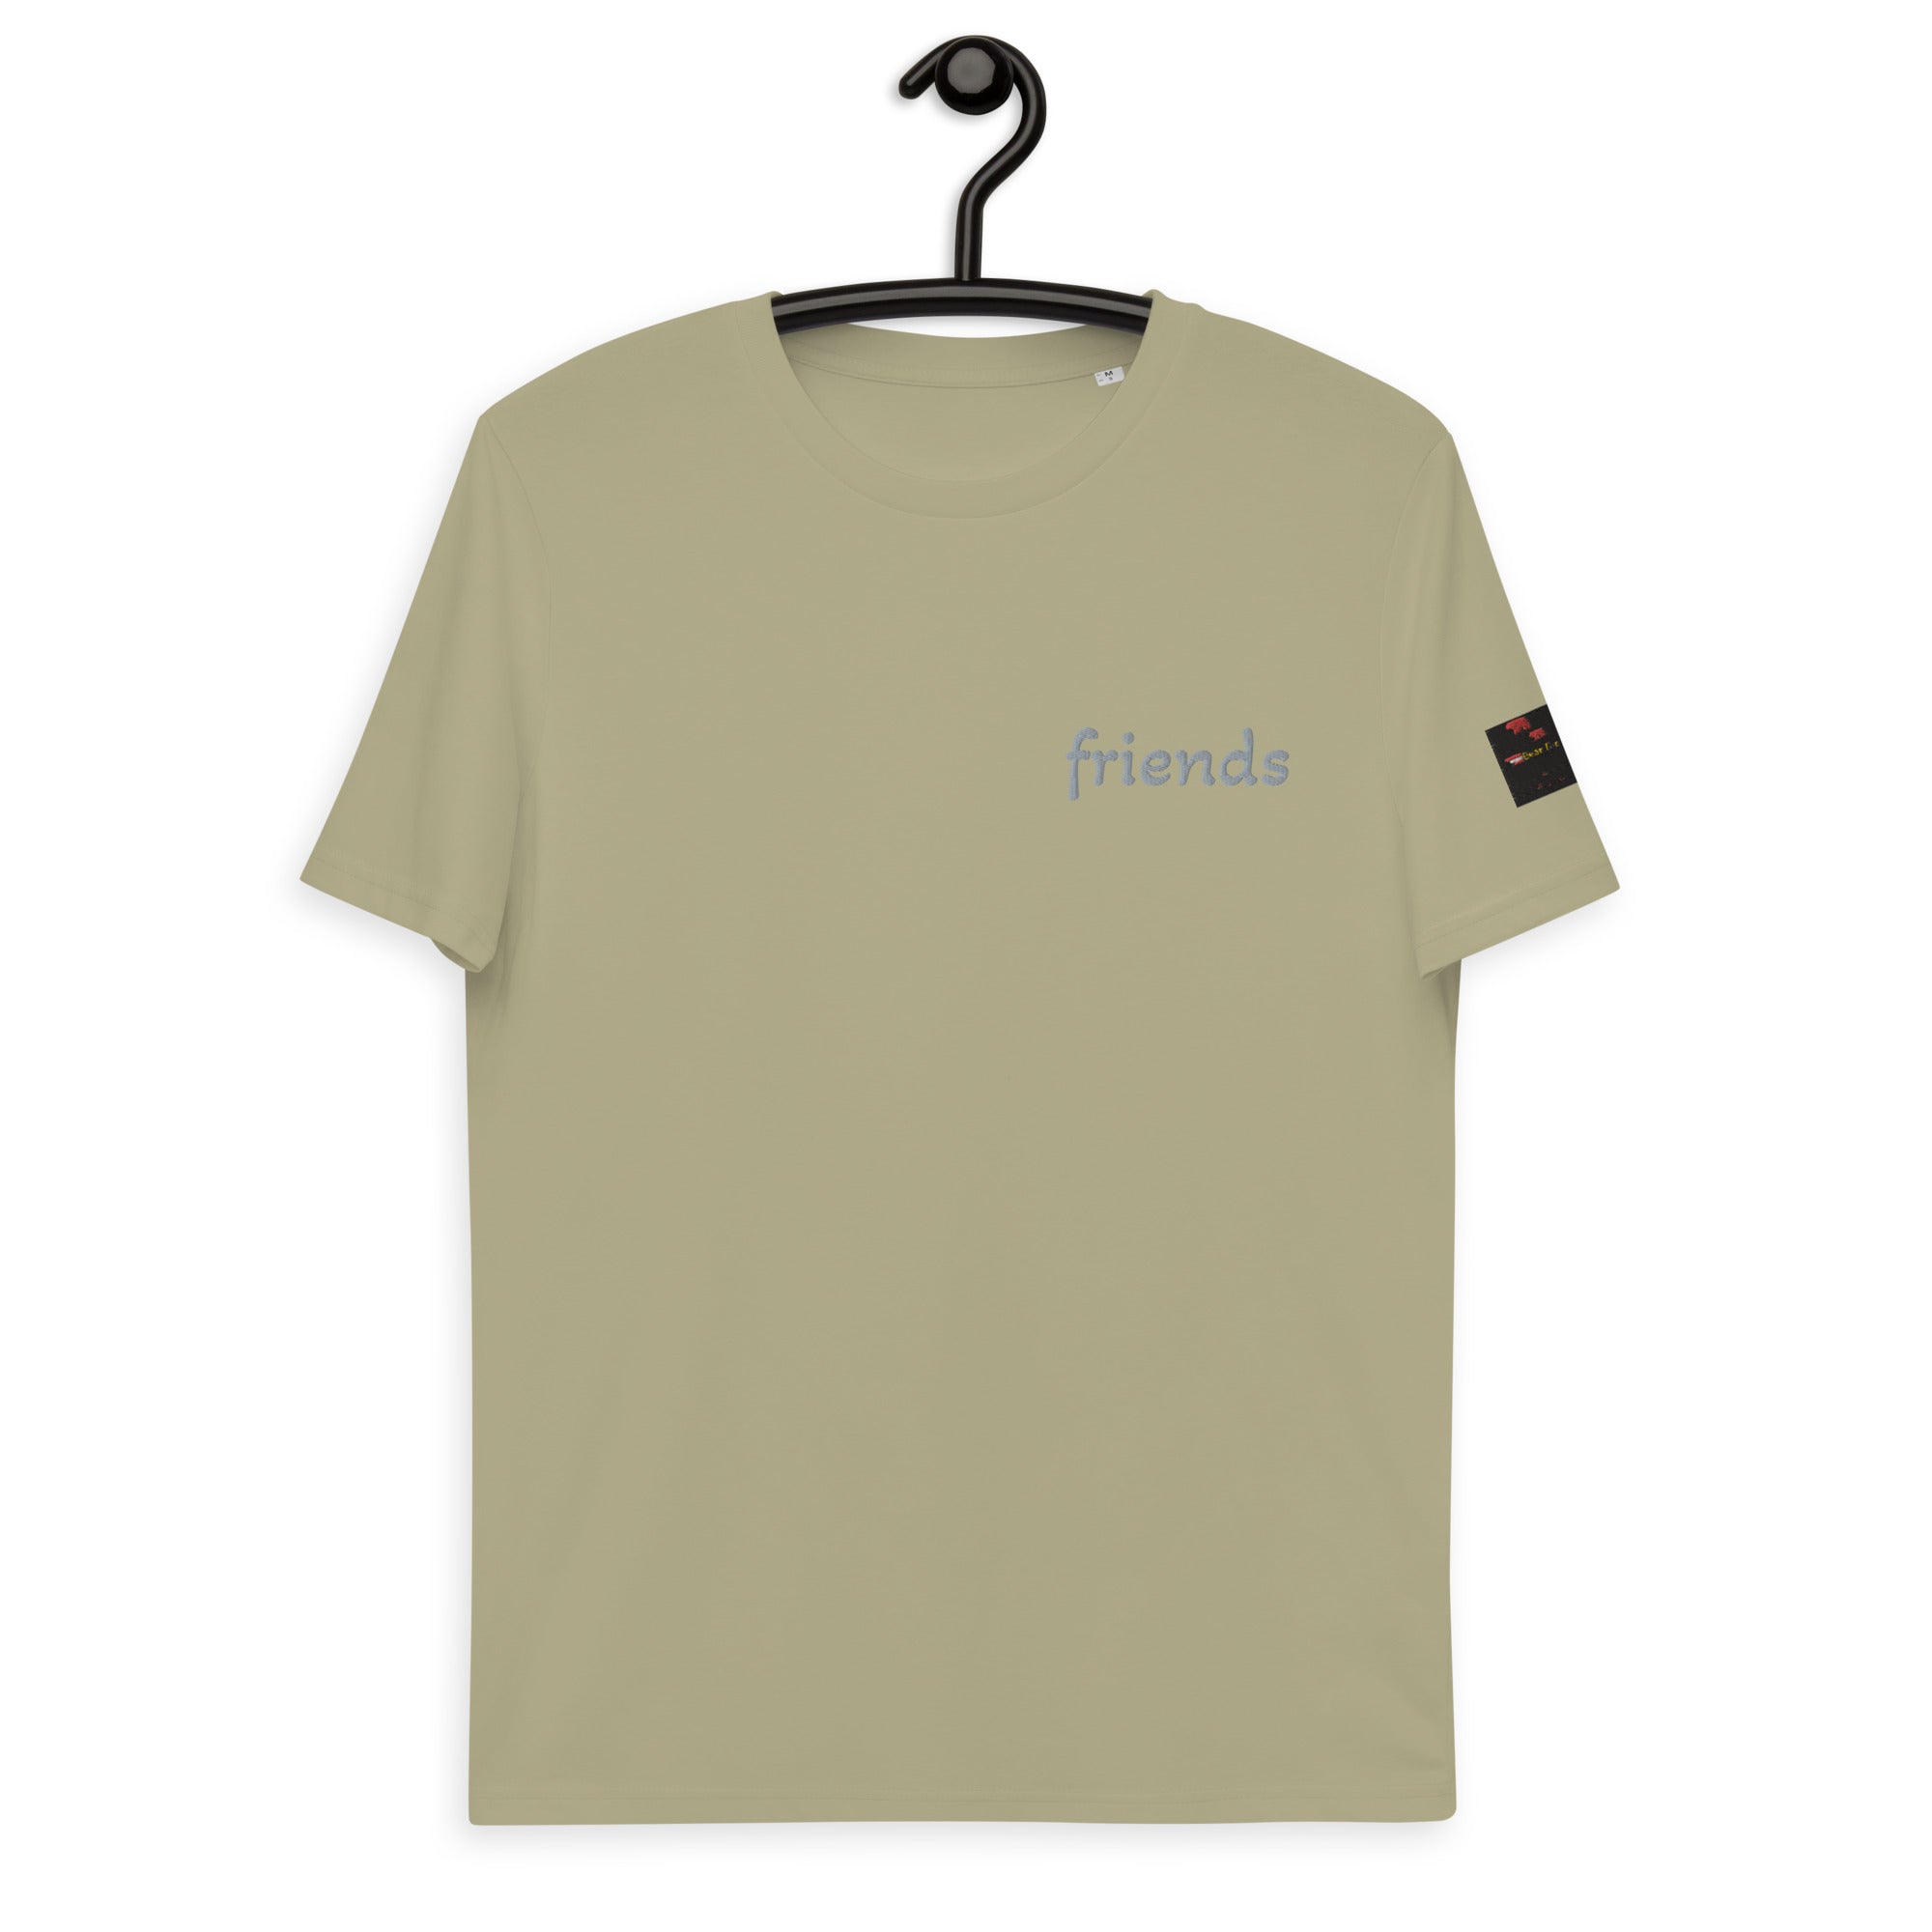 Eco-friendly organic "friends" t-shirt (For customers wishing to dress stylishly and fashionably.